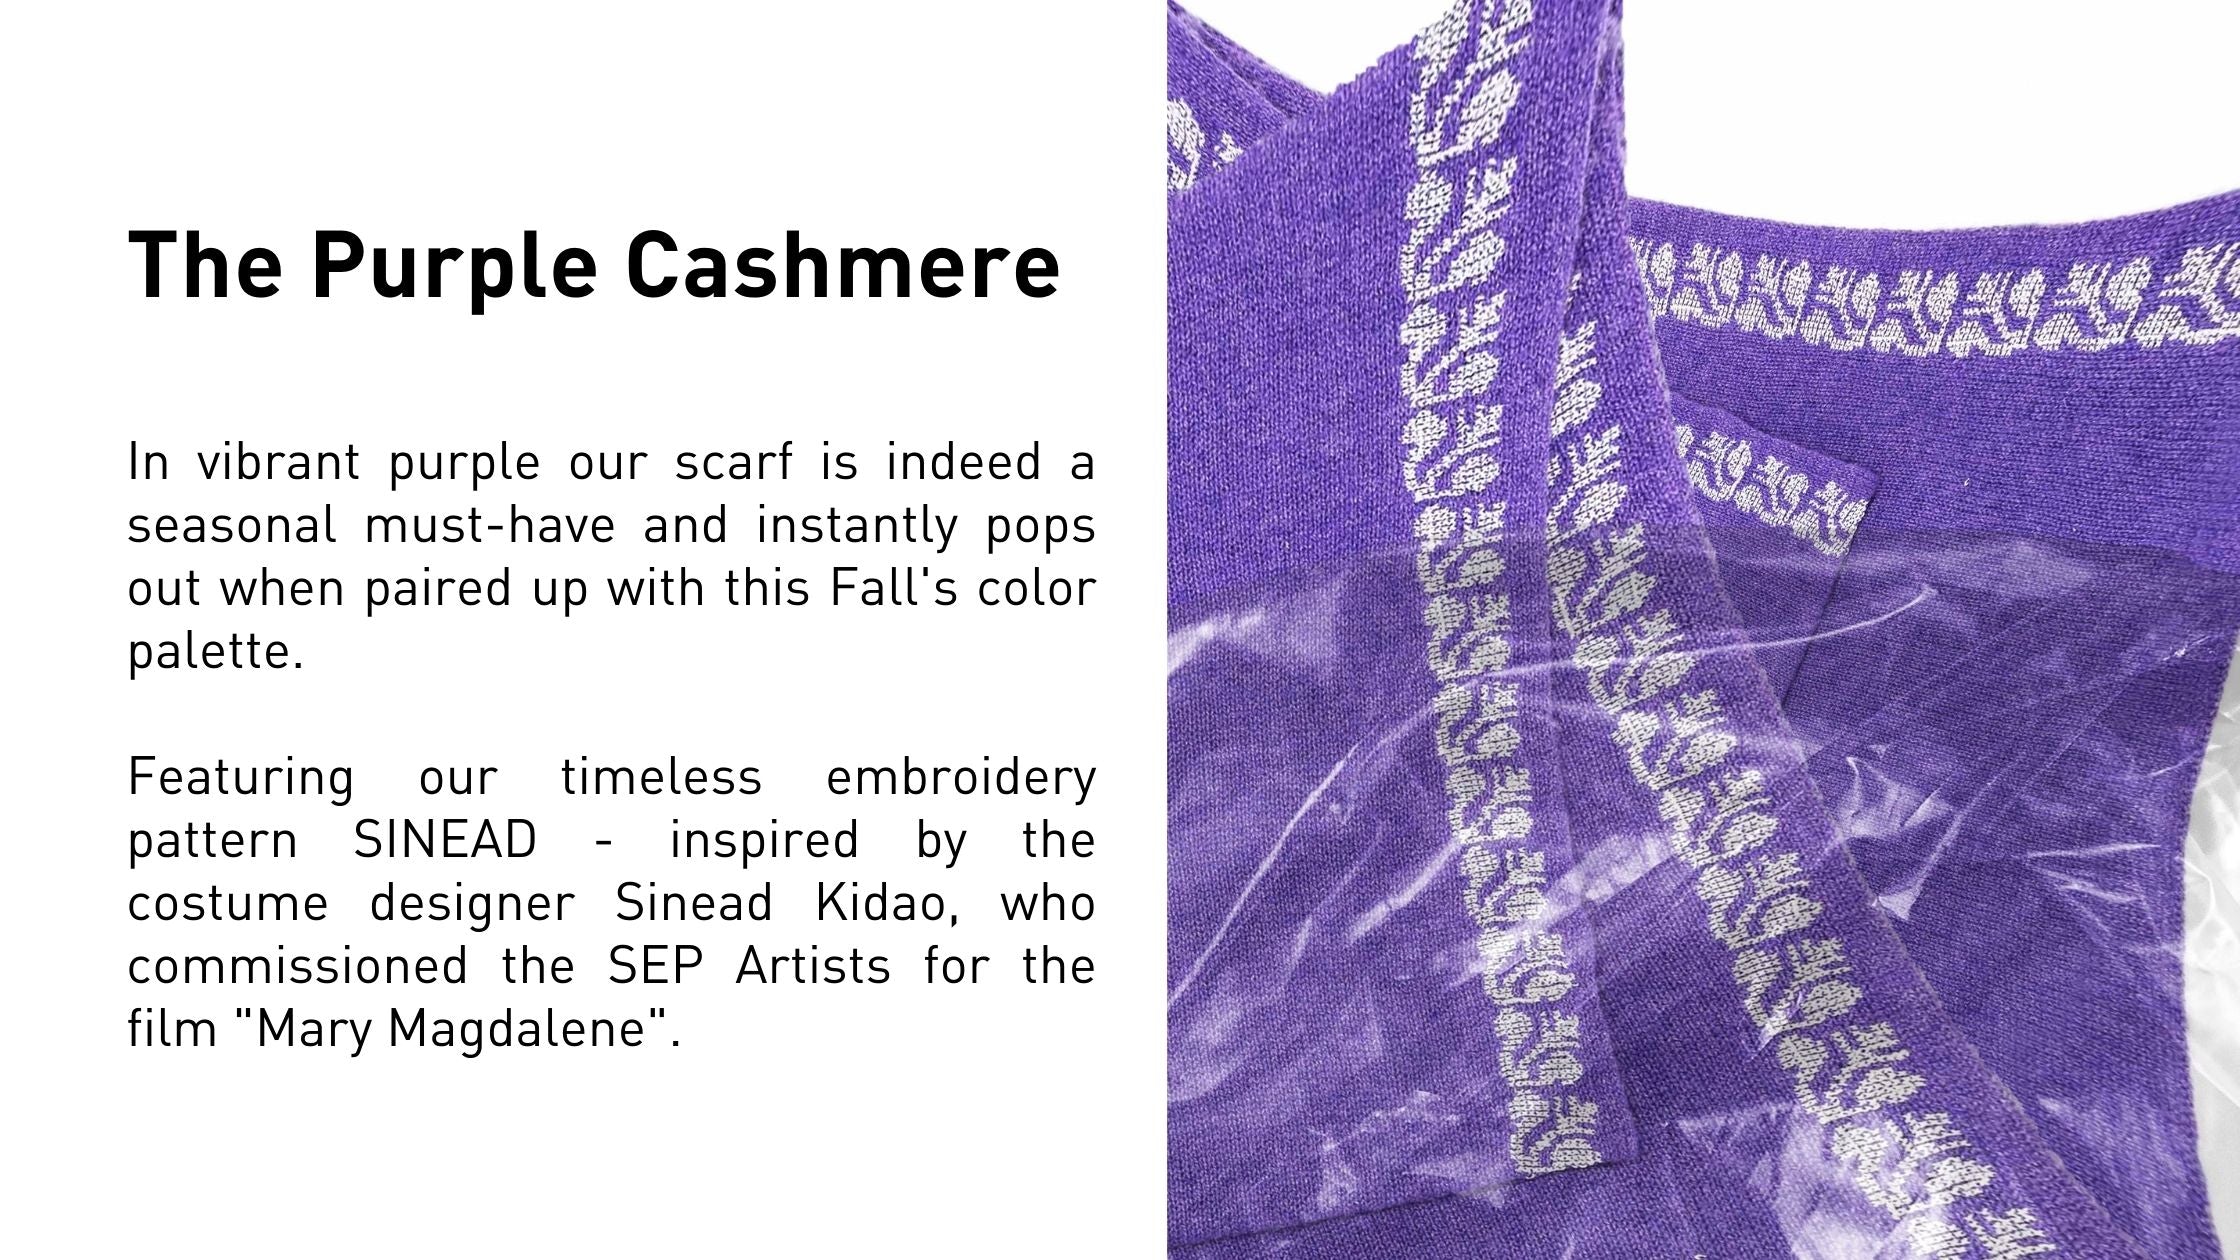 The Purple Cashmere  In vibrant purple our scarf is indeed a seasonal must-have and instantly pops out when paired up with this Fall's color palette.   Featuring our timeless embroidery pattern SINEAD - inspired by the costume designer Sinead Kidao, who commissioned the SEP Artists for the film "Mary Magdalene".